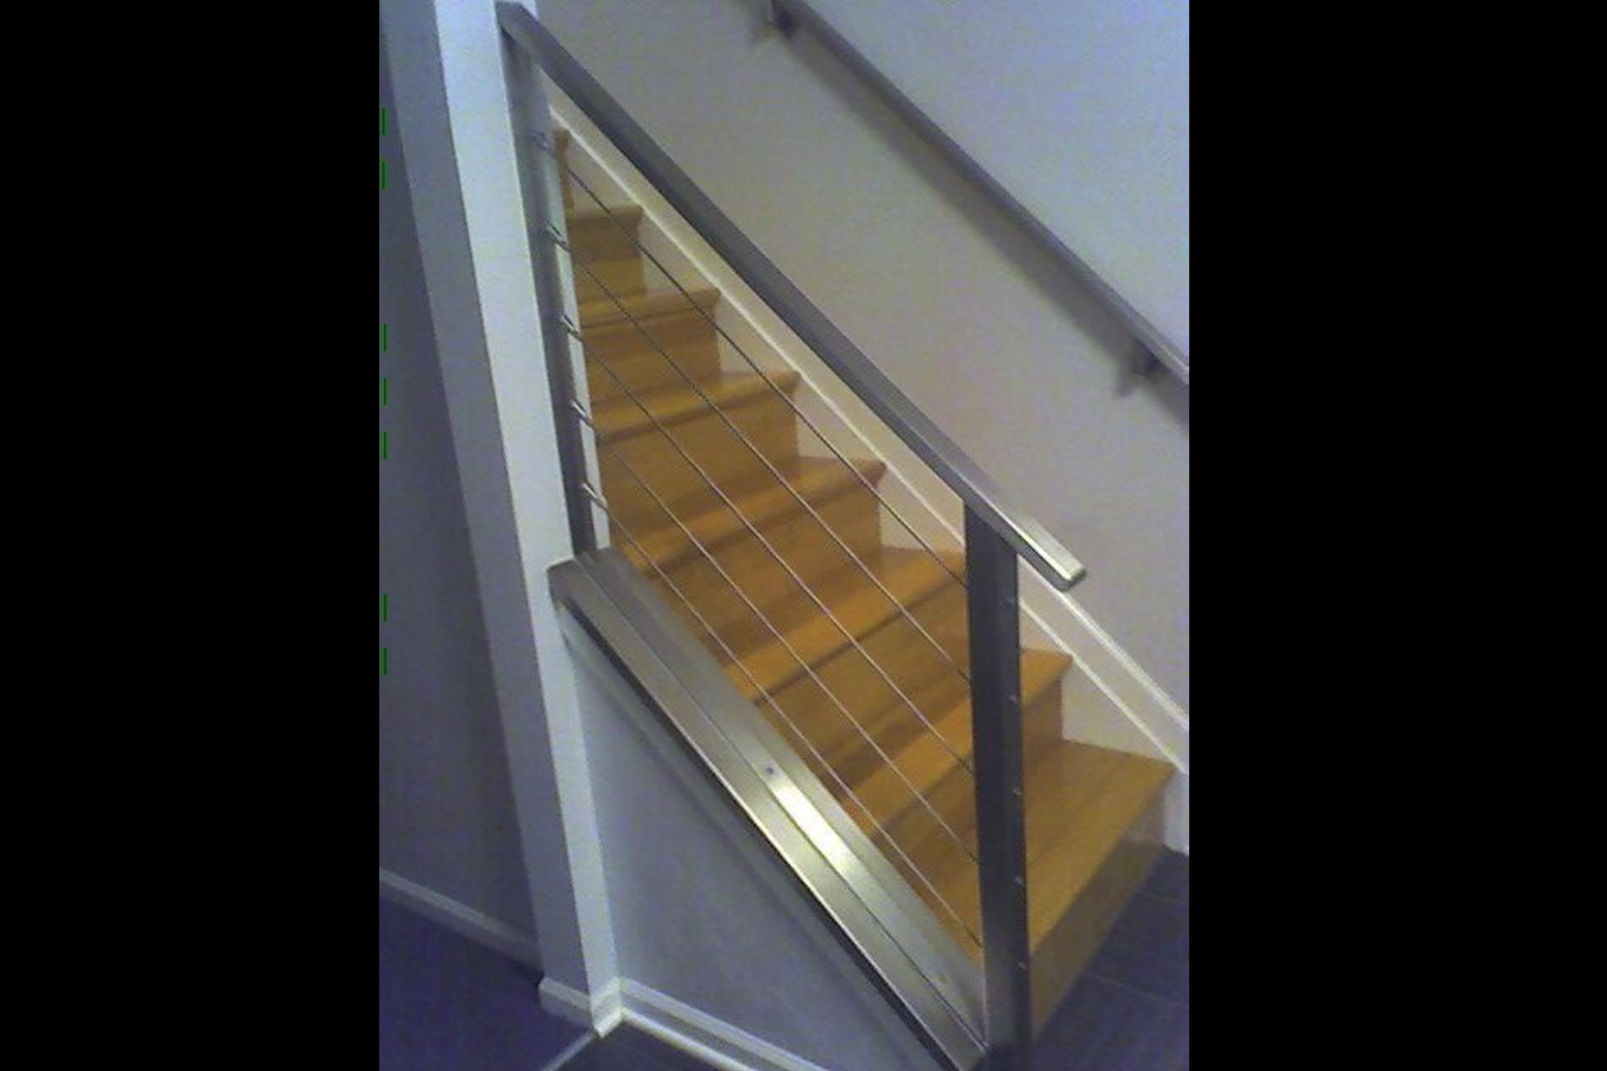 Photo of grey metal cable railing on wooden indoor staircase from the bottom